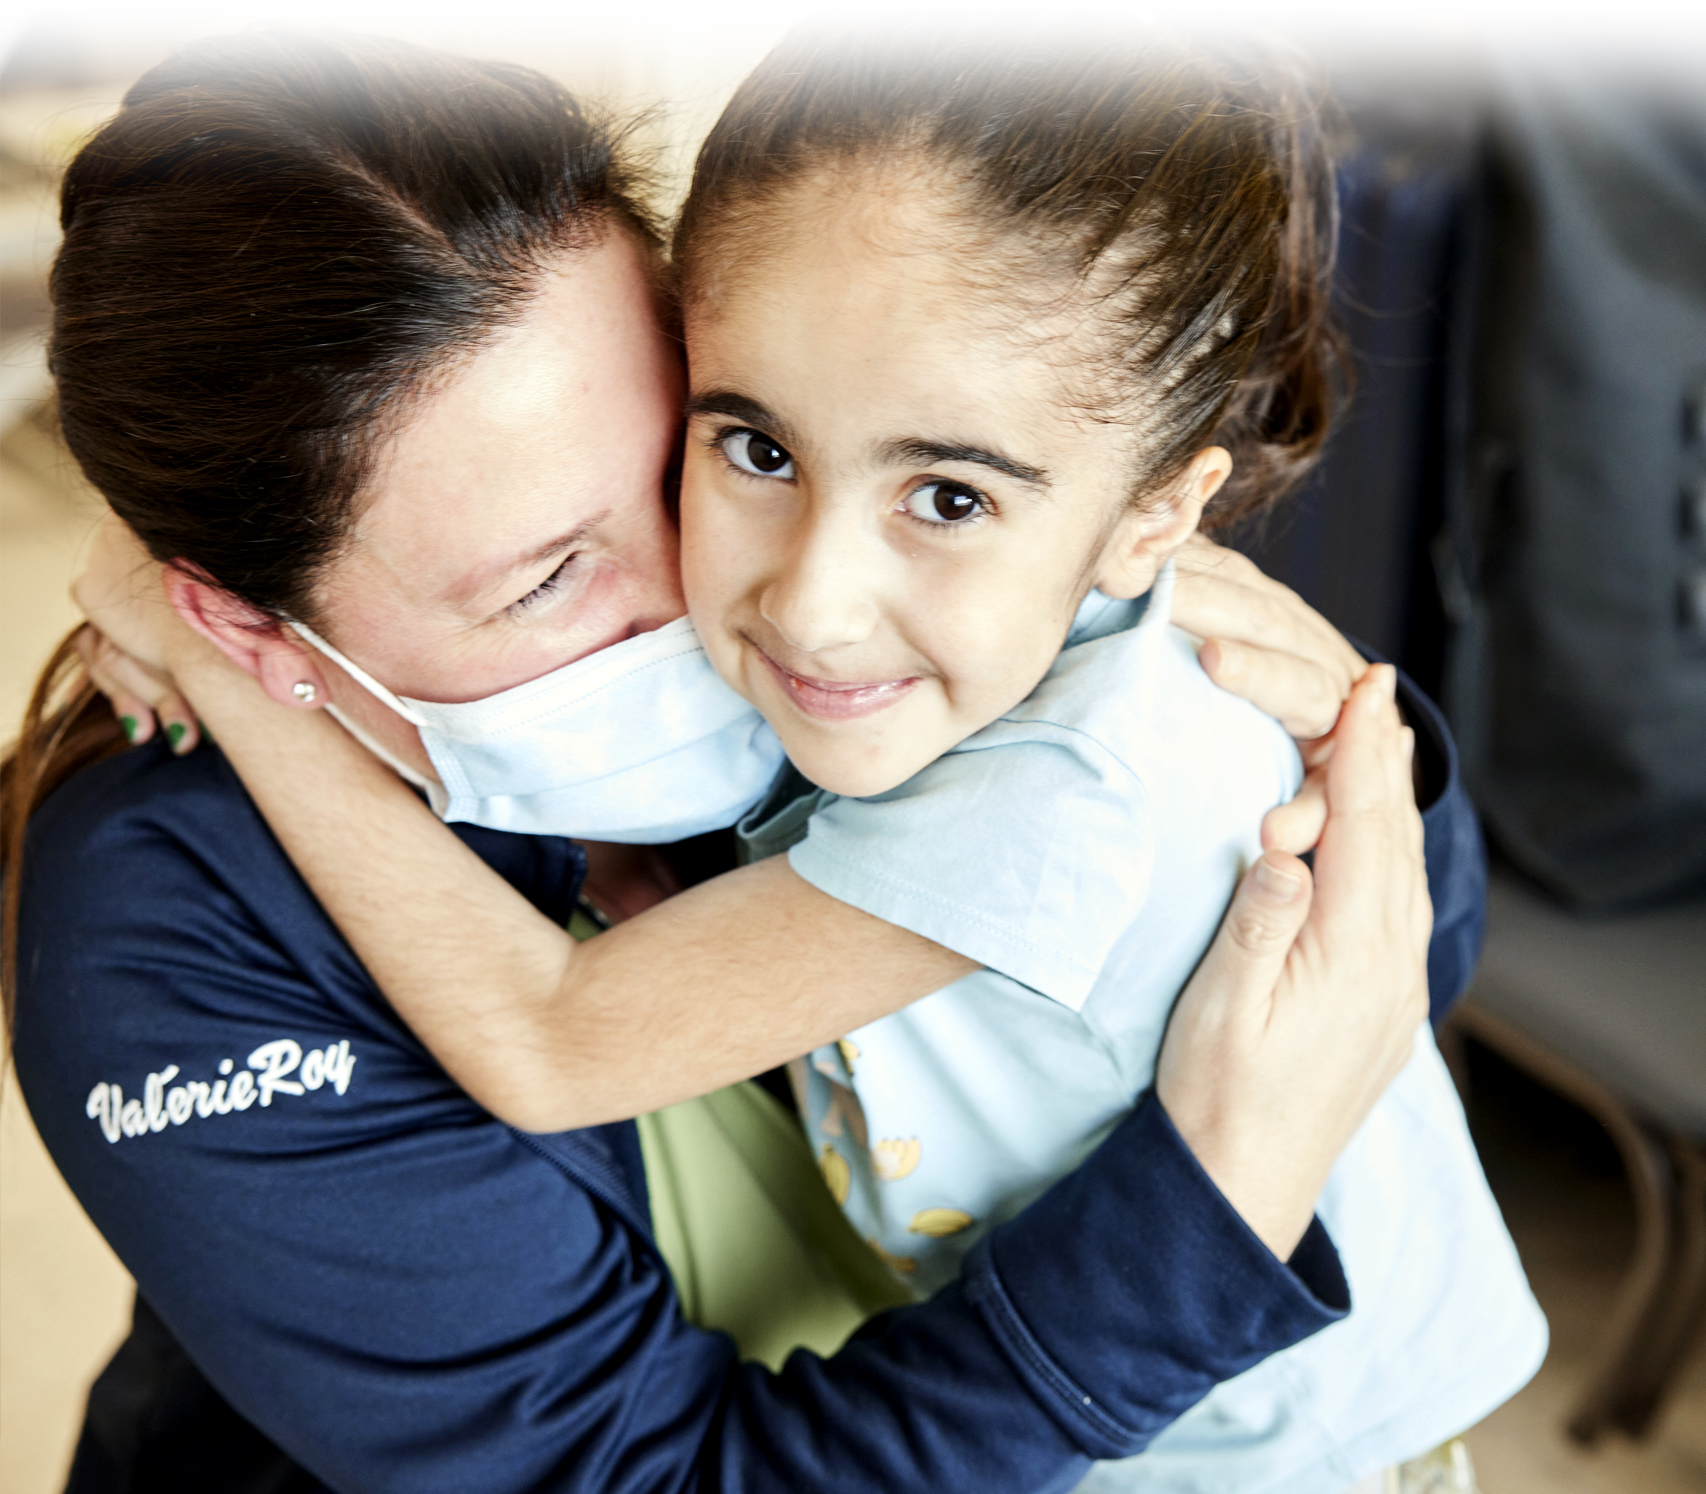 Seven-year-old Eva with her arms affectionately wrapped around the neck of her nurse at Sainte-Justine.